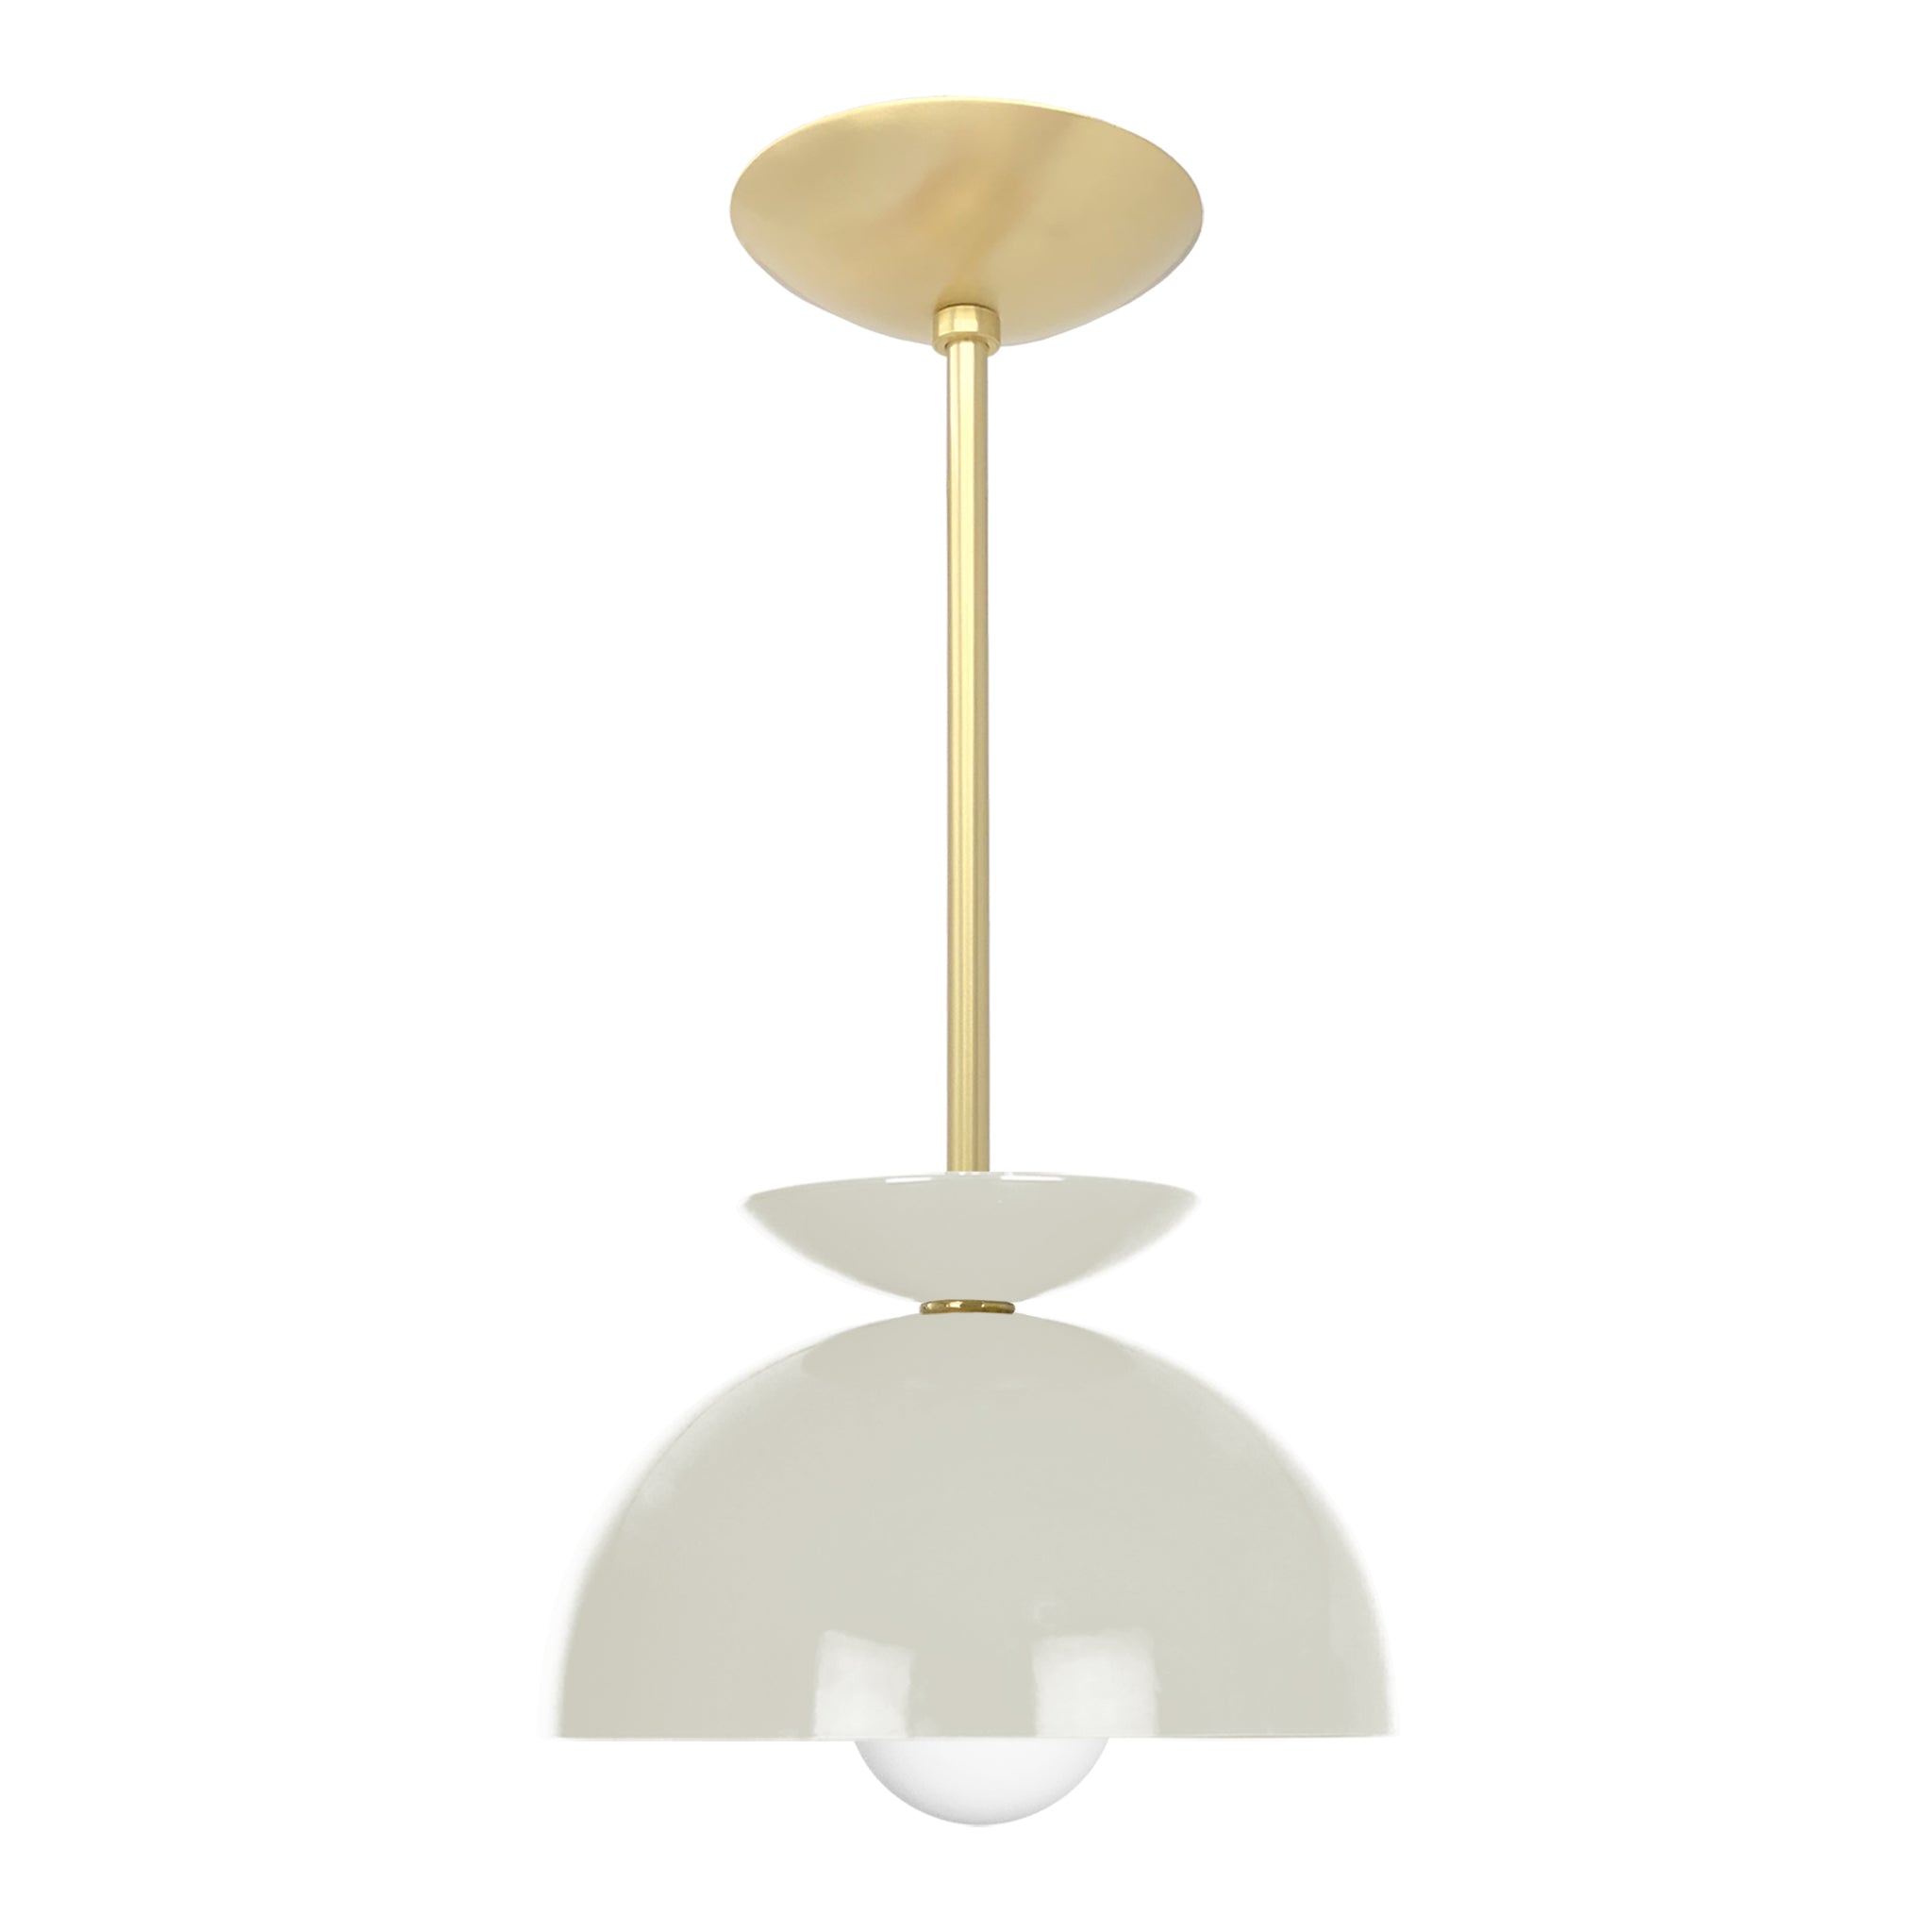 Brass and bone color Echo pendant 10" Dutton Brown lighting